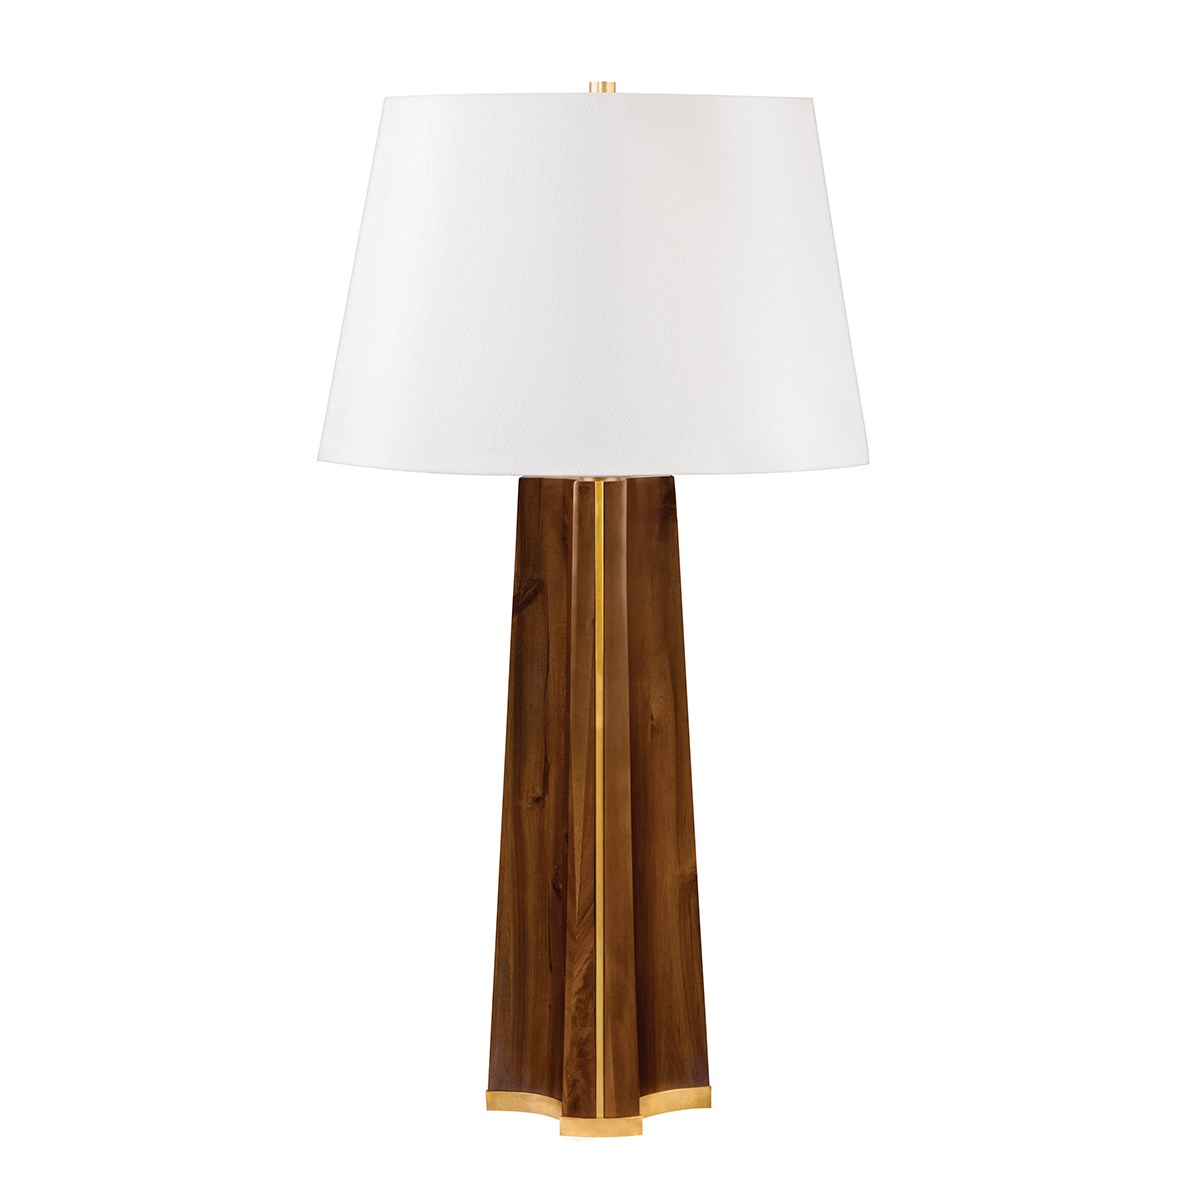 star shaped table lamp